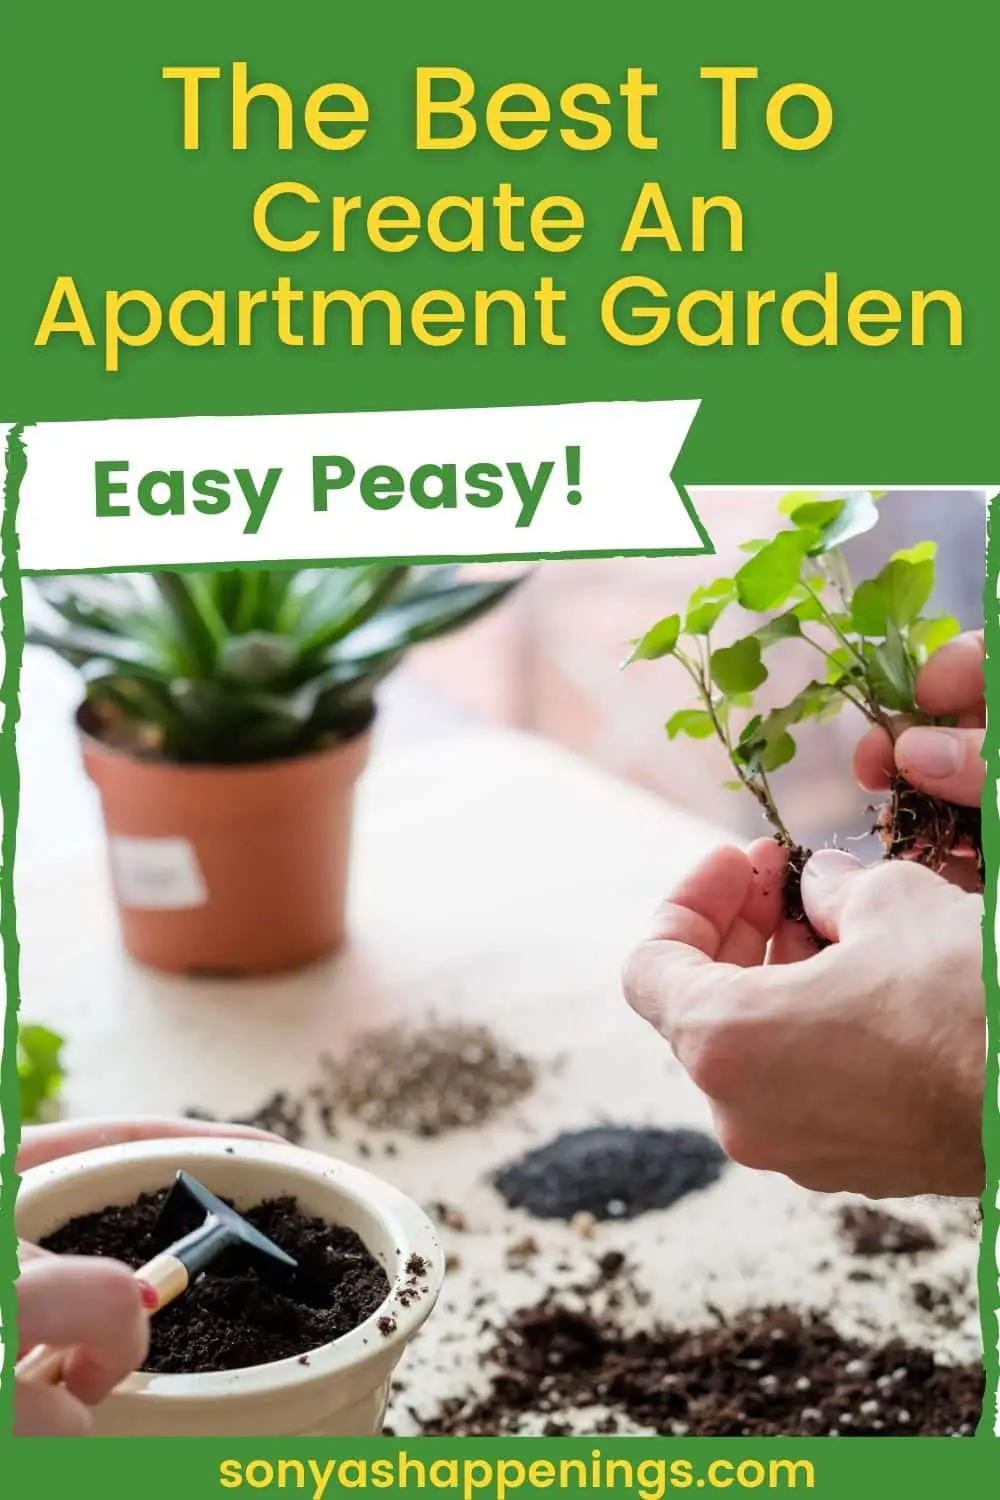 The Best Way To Create An Apartment Garden